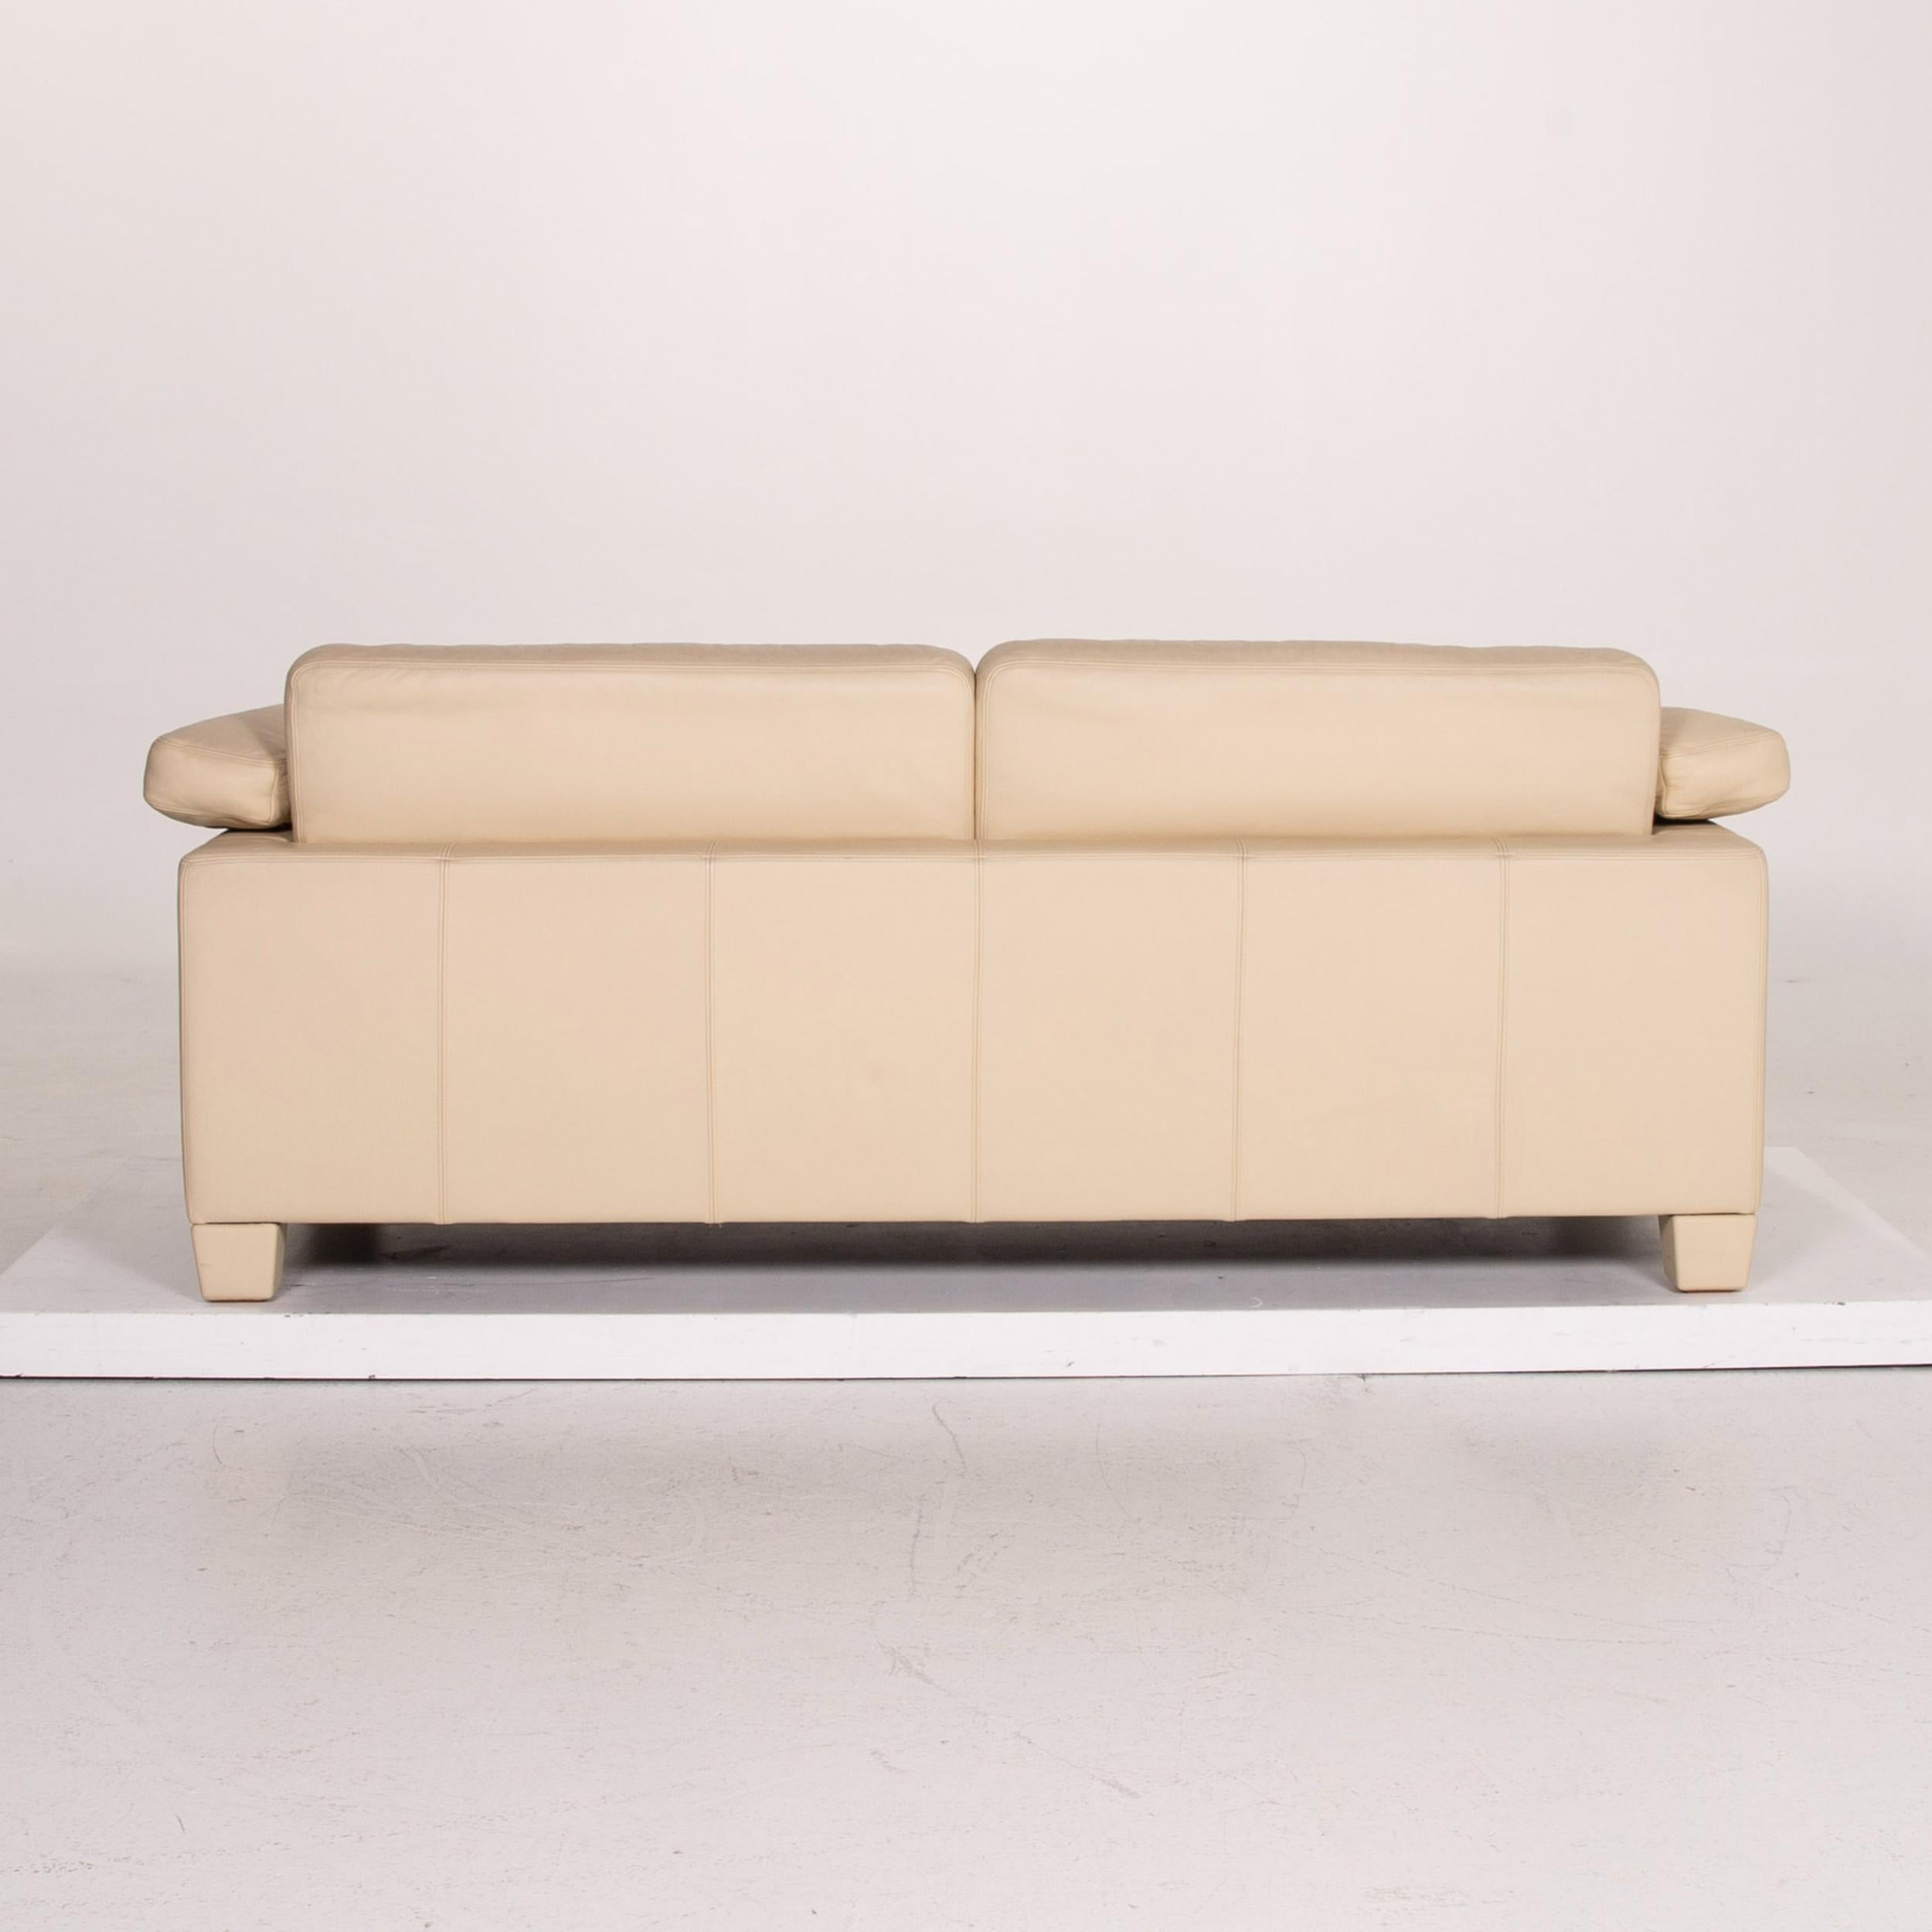 Contemporary De Sede Ds 70 Leather Sofa Beige Three-Seat Couch